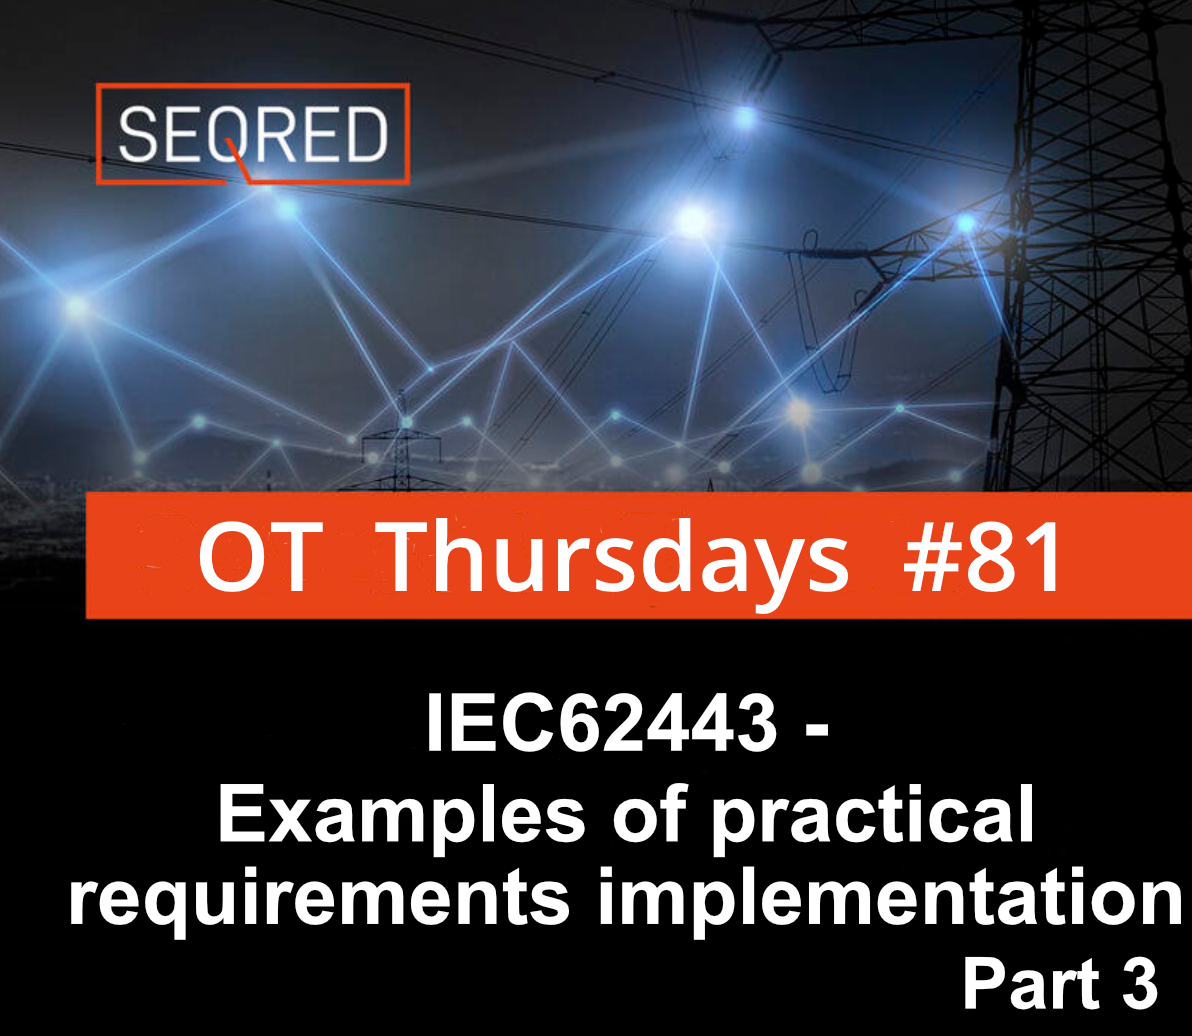 IEC62443 - Examples of practical requirements implementation